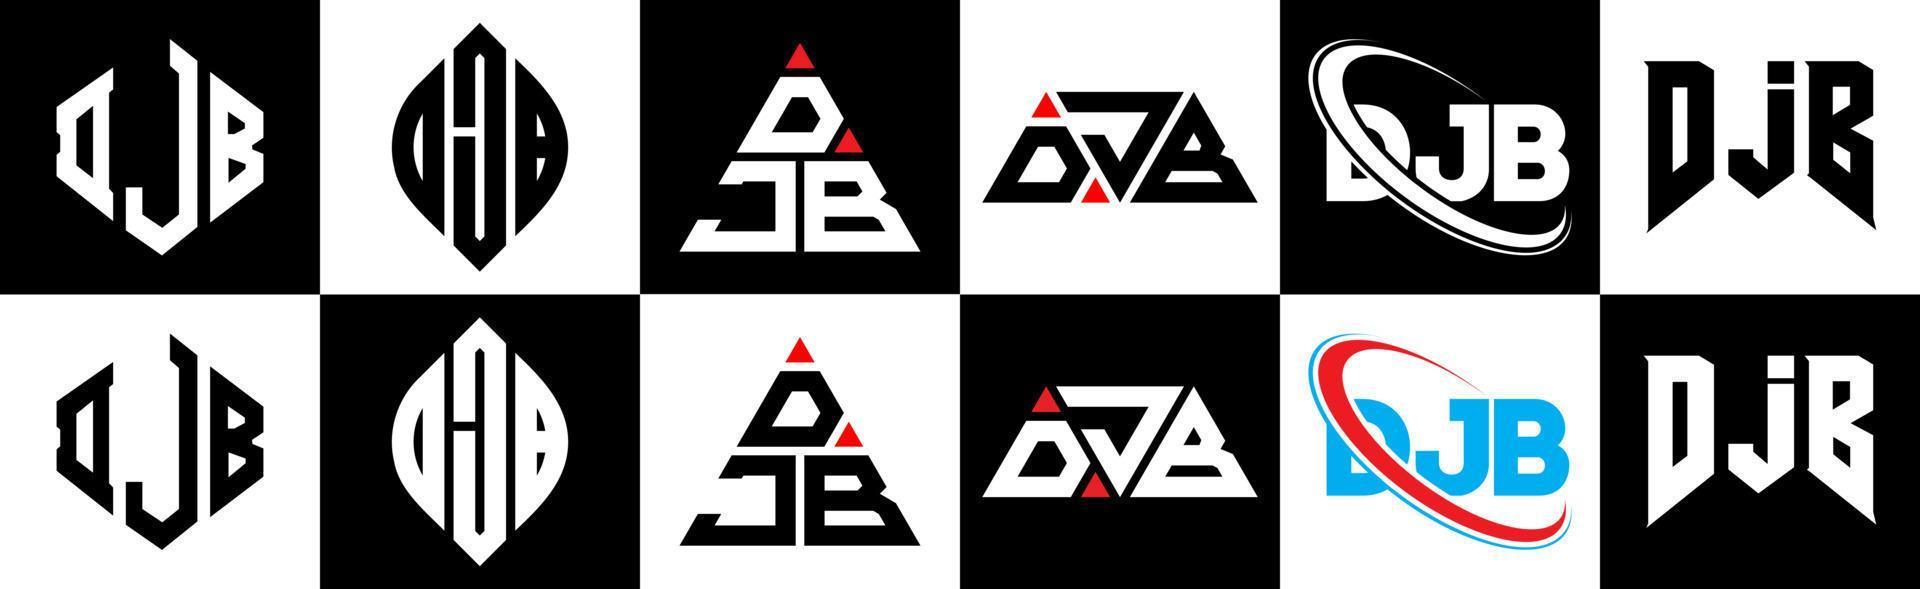 DJB letter logo design in six style. DJB polygon, circle, triangle, hexagon, flat and simple style with black and white color variation letter logo set in one artboard. DJB minimalist and classic logo vector